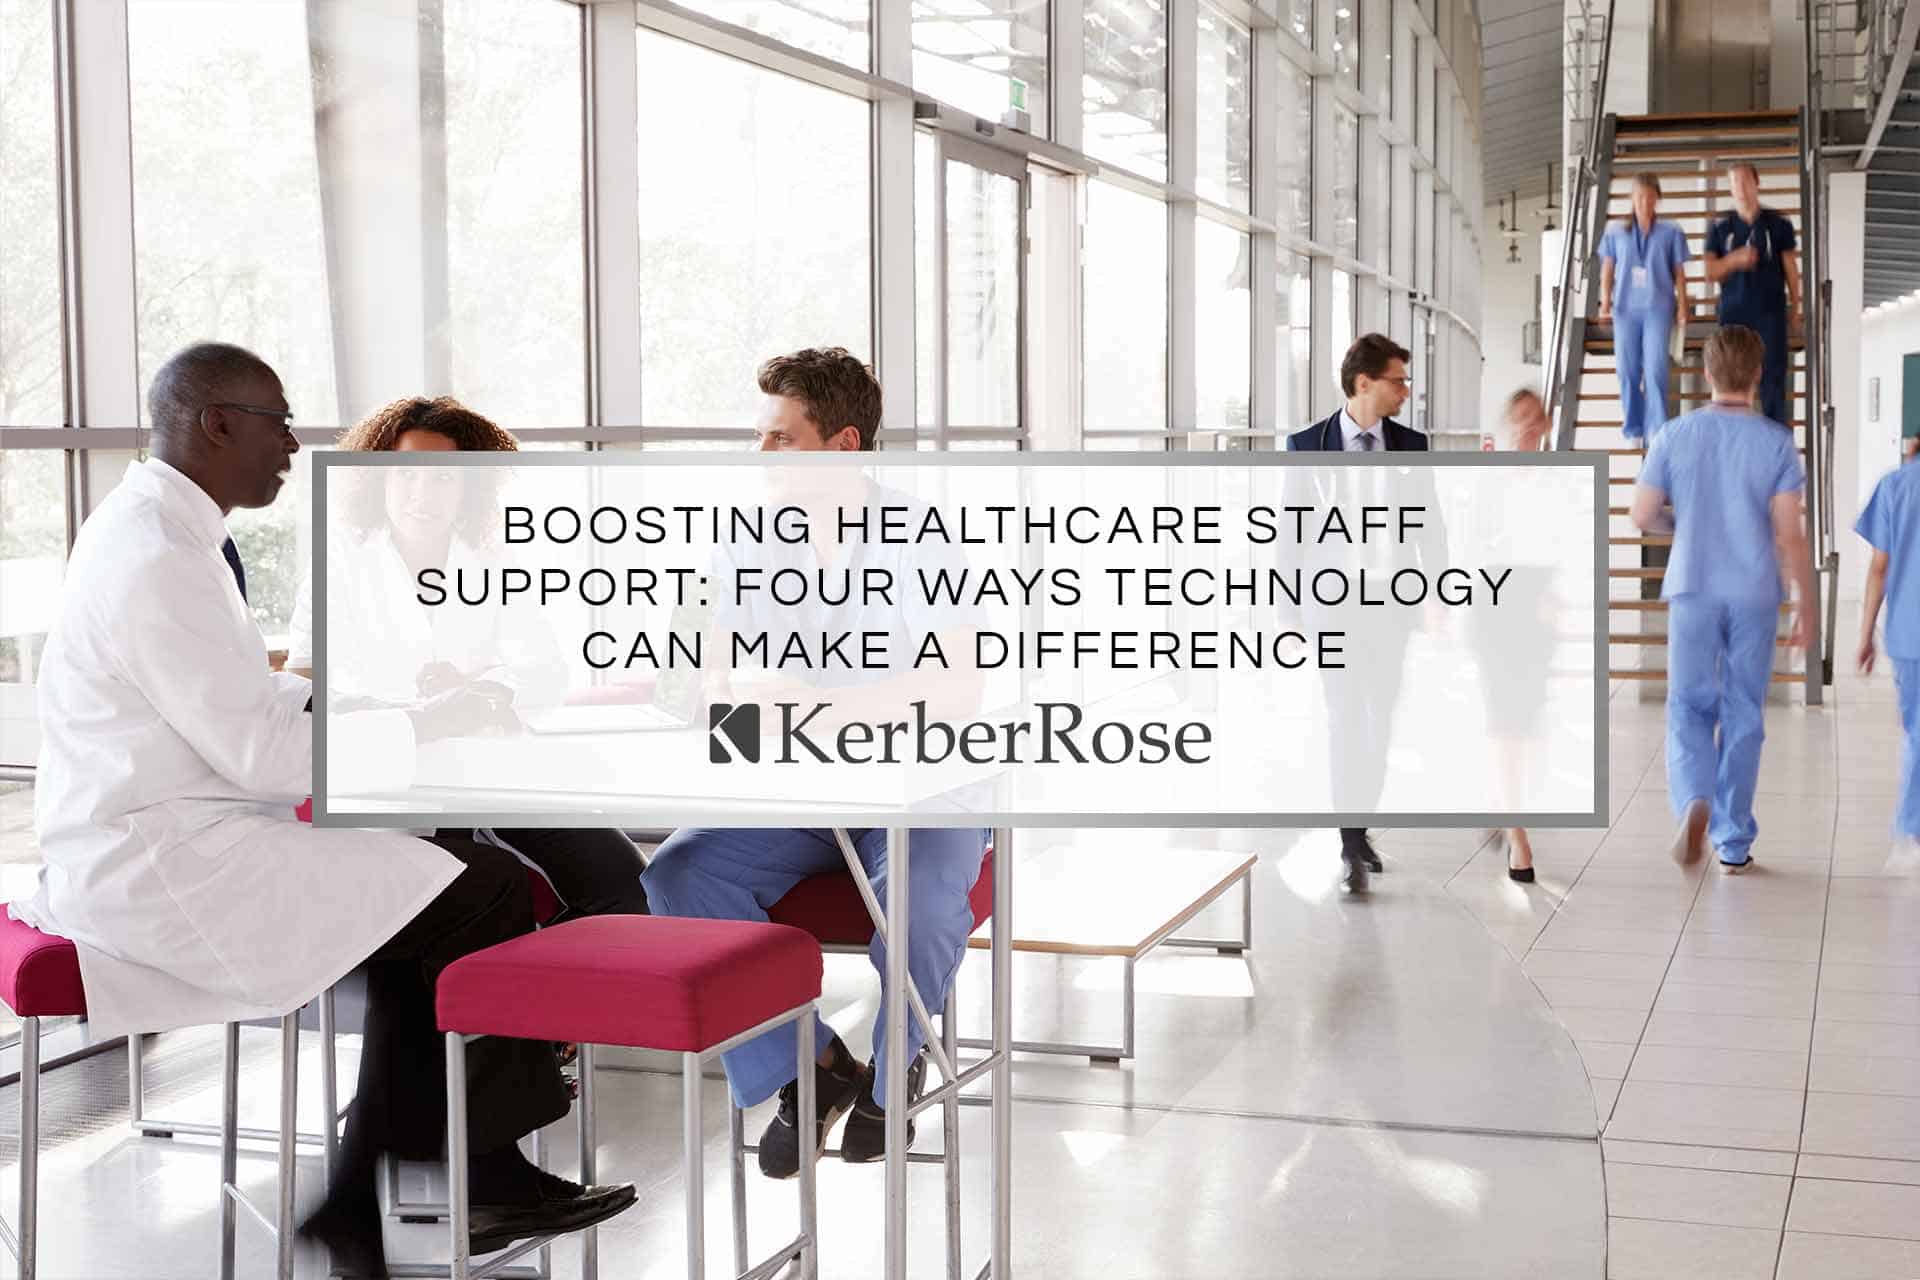 Boosting Healthcare Staff Support: Four Ways Technology Can Make a Difference